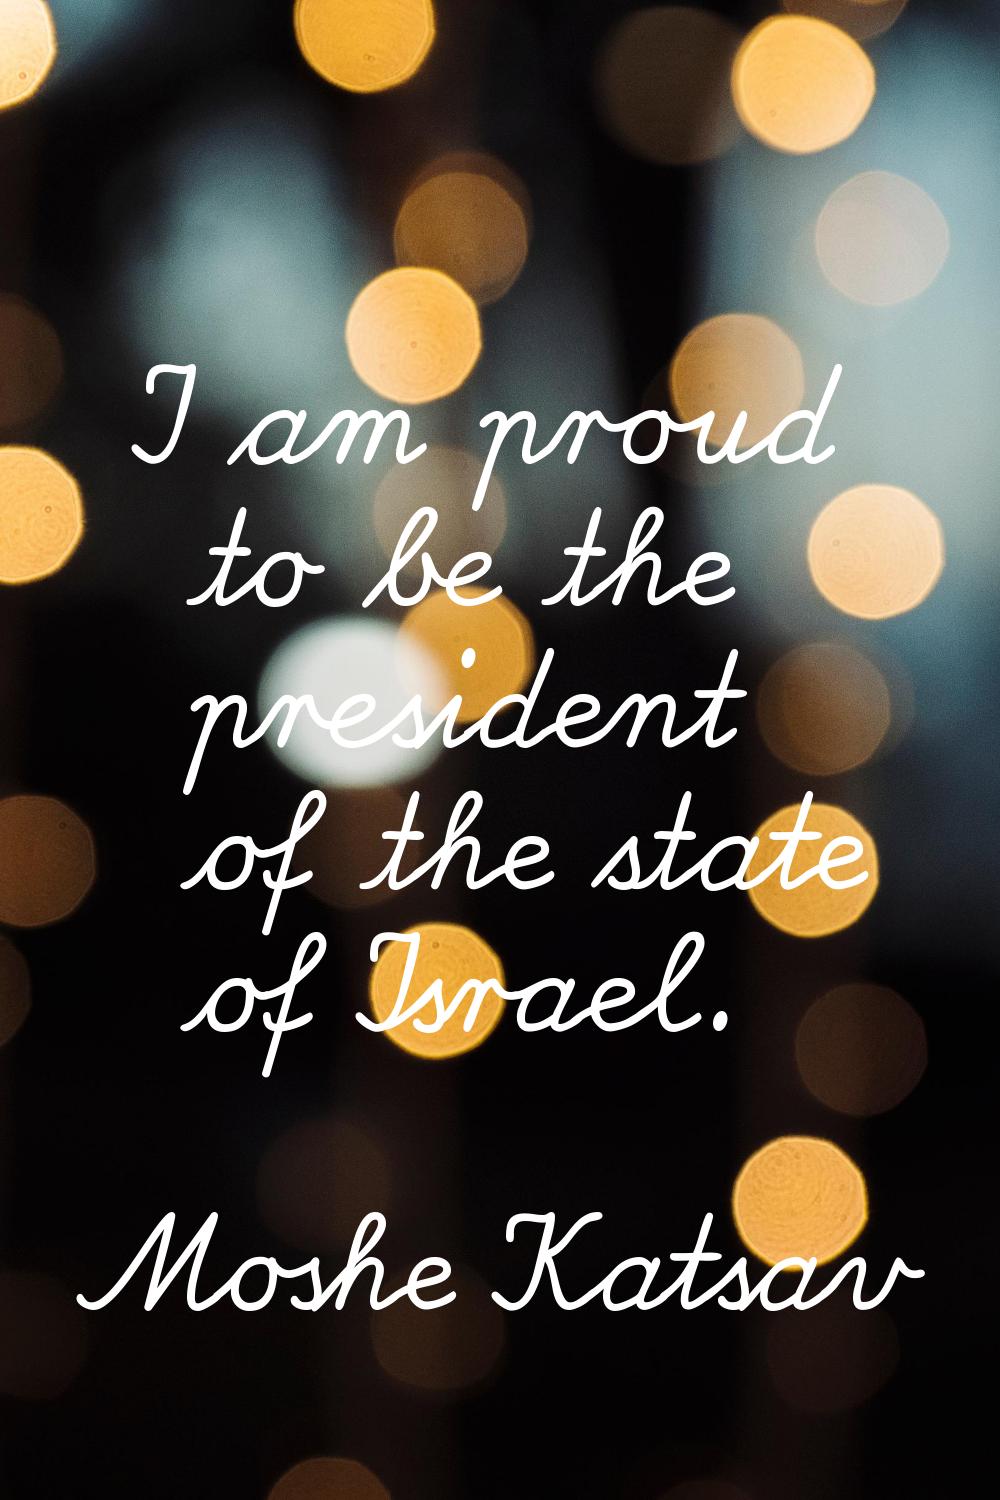 I am proud to be the president of the state of Israel.